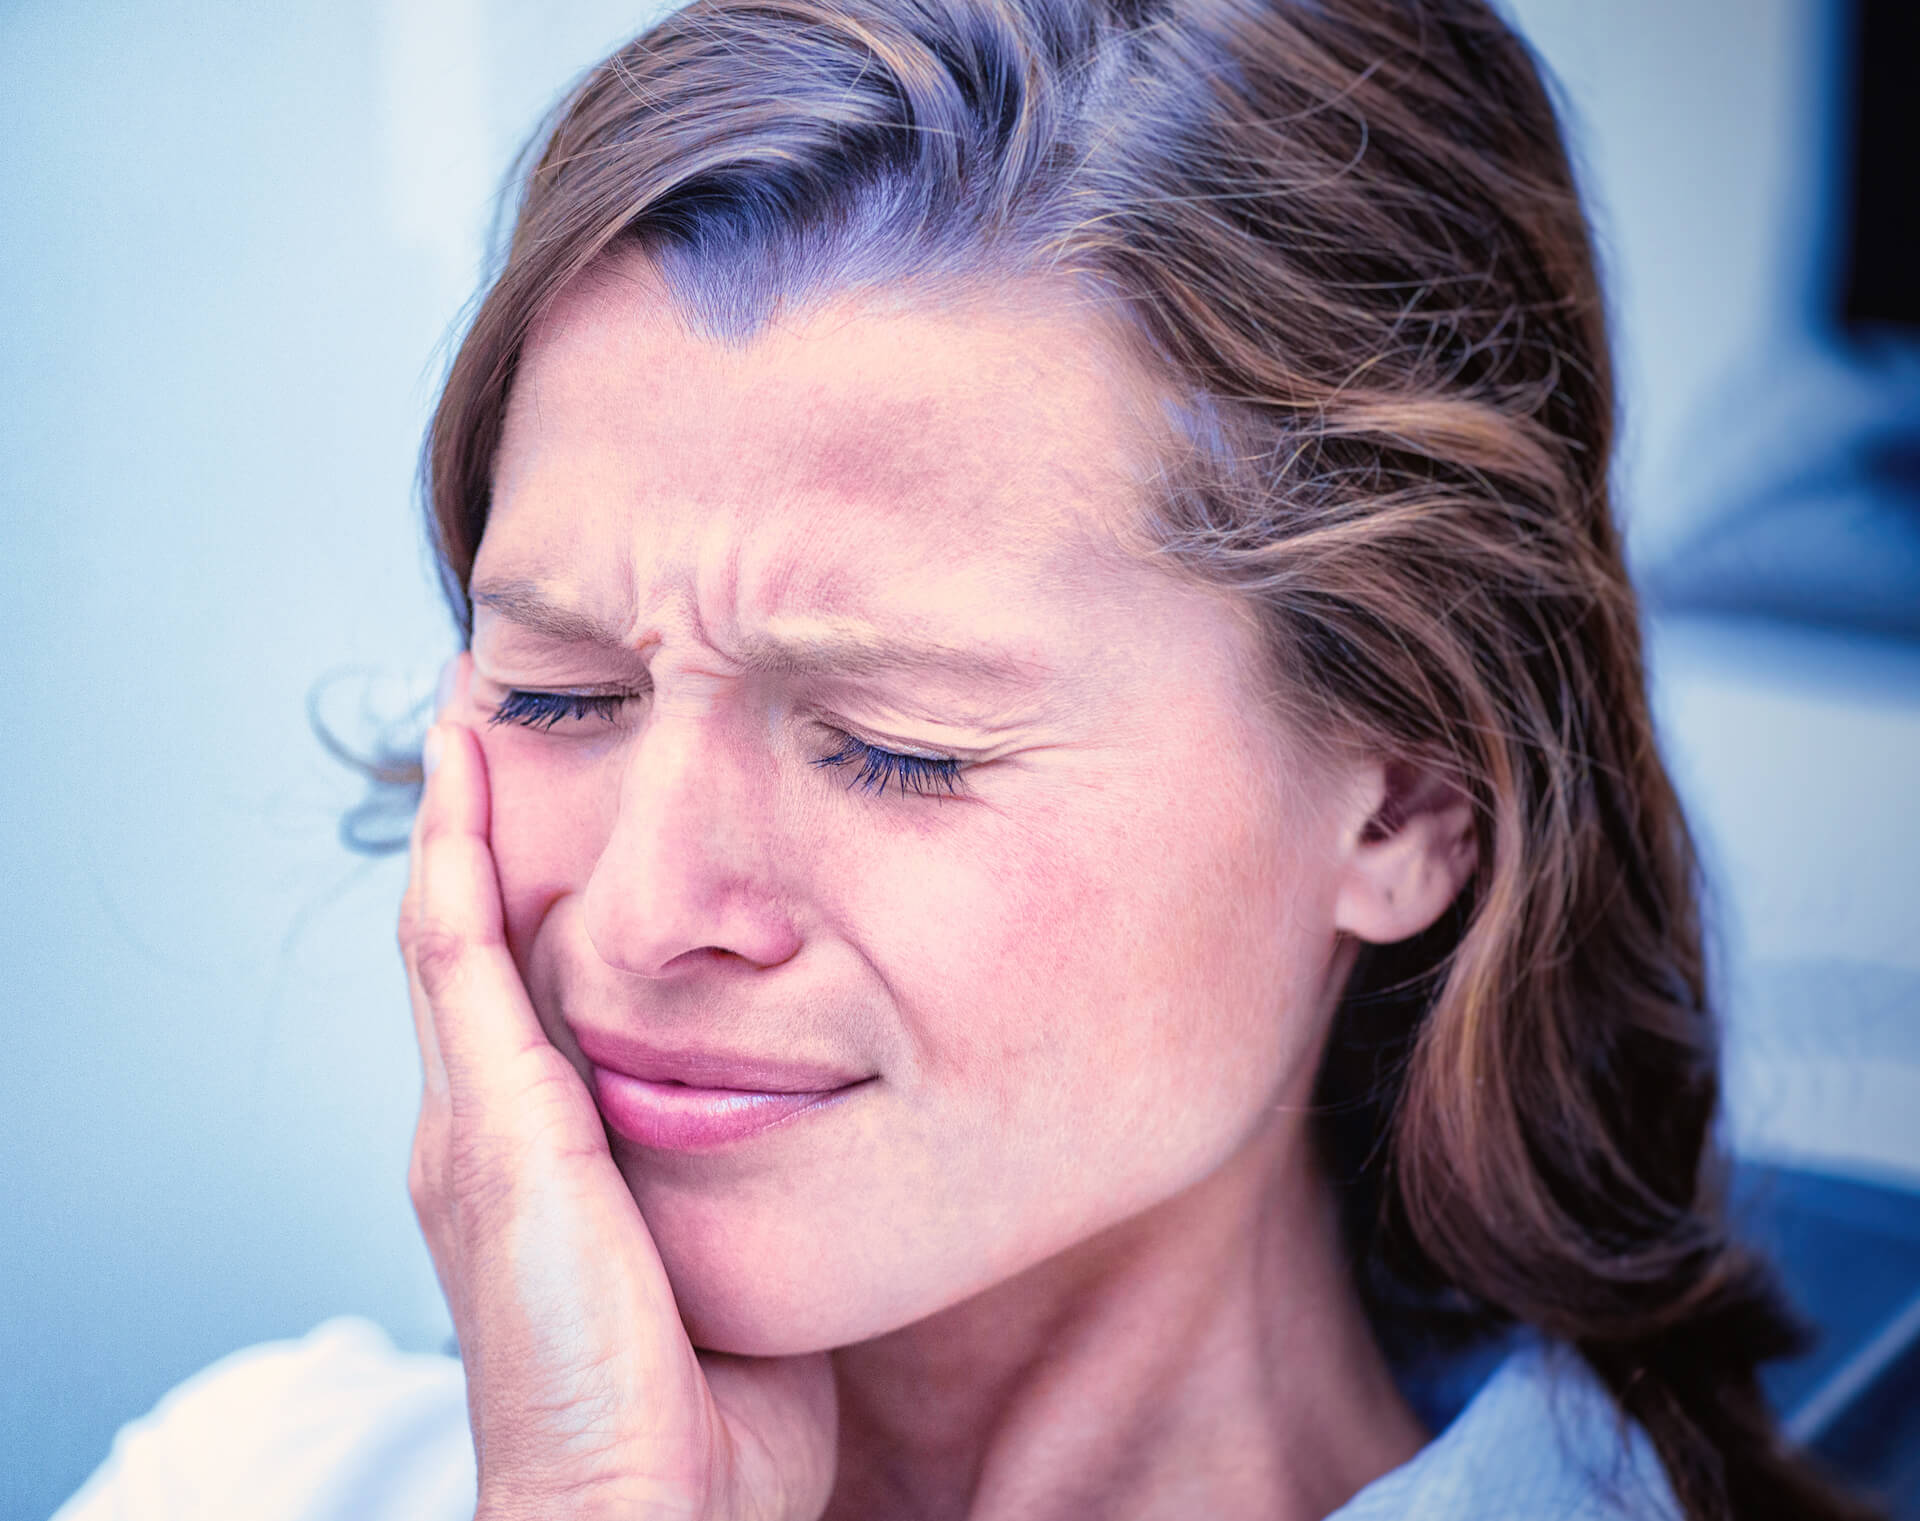 Woman with throbbing pain after tooth extraction.